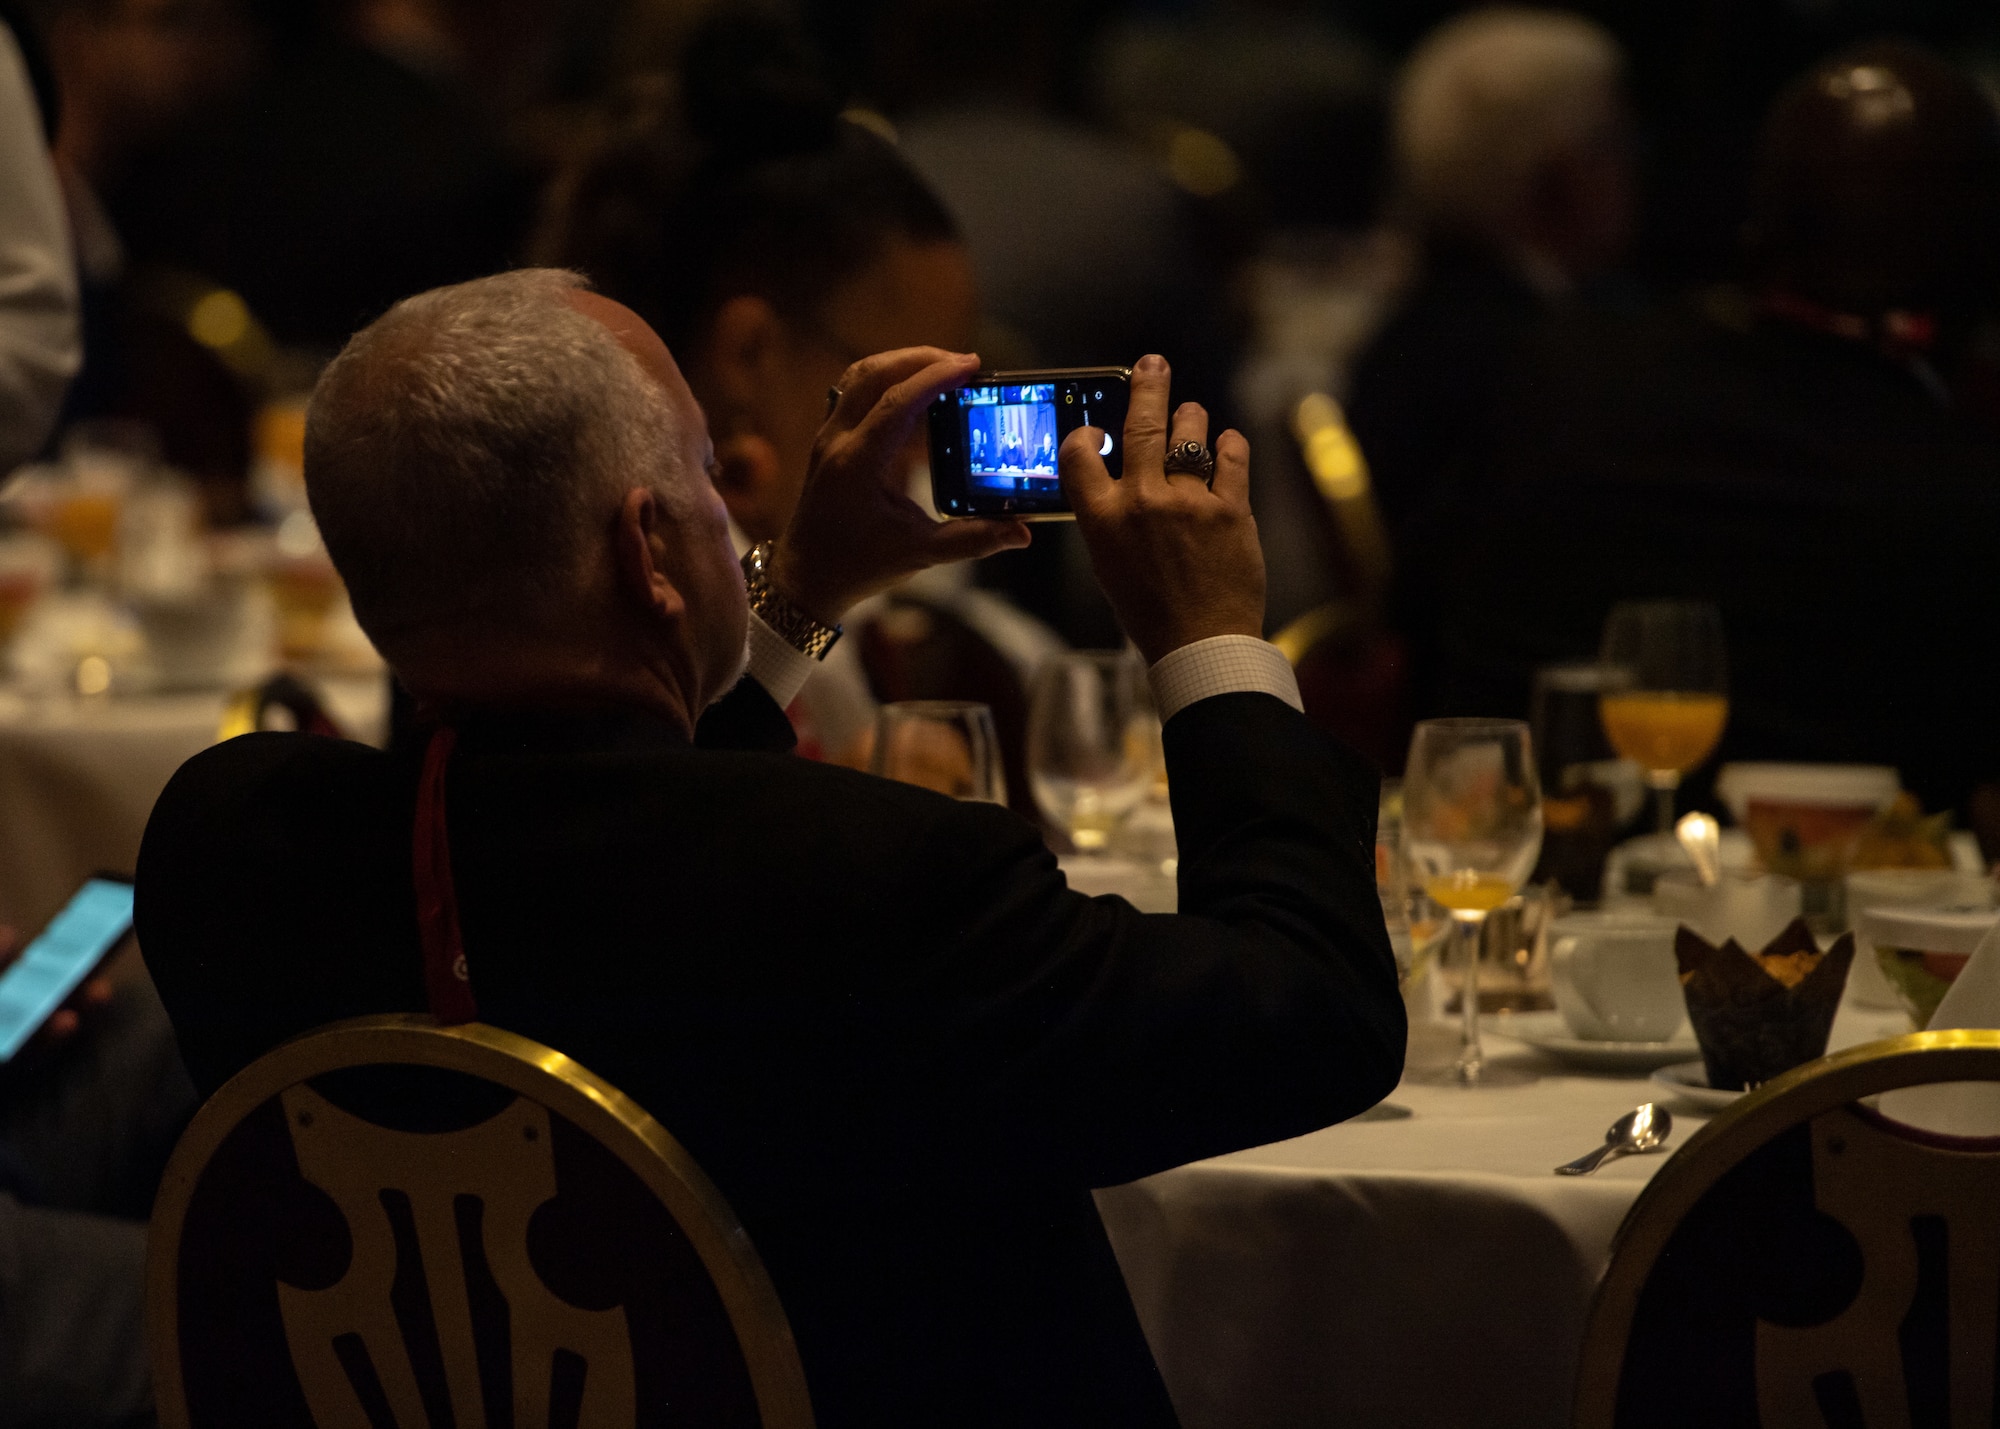 A Space Symposium attendee takes a photo during the Satellite Forum Breakfast in Colorado Hall, on Aug. 25, 2021.